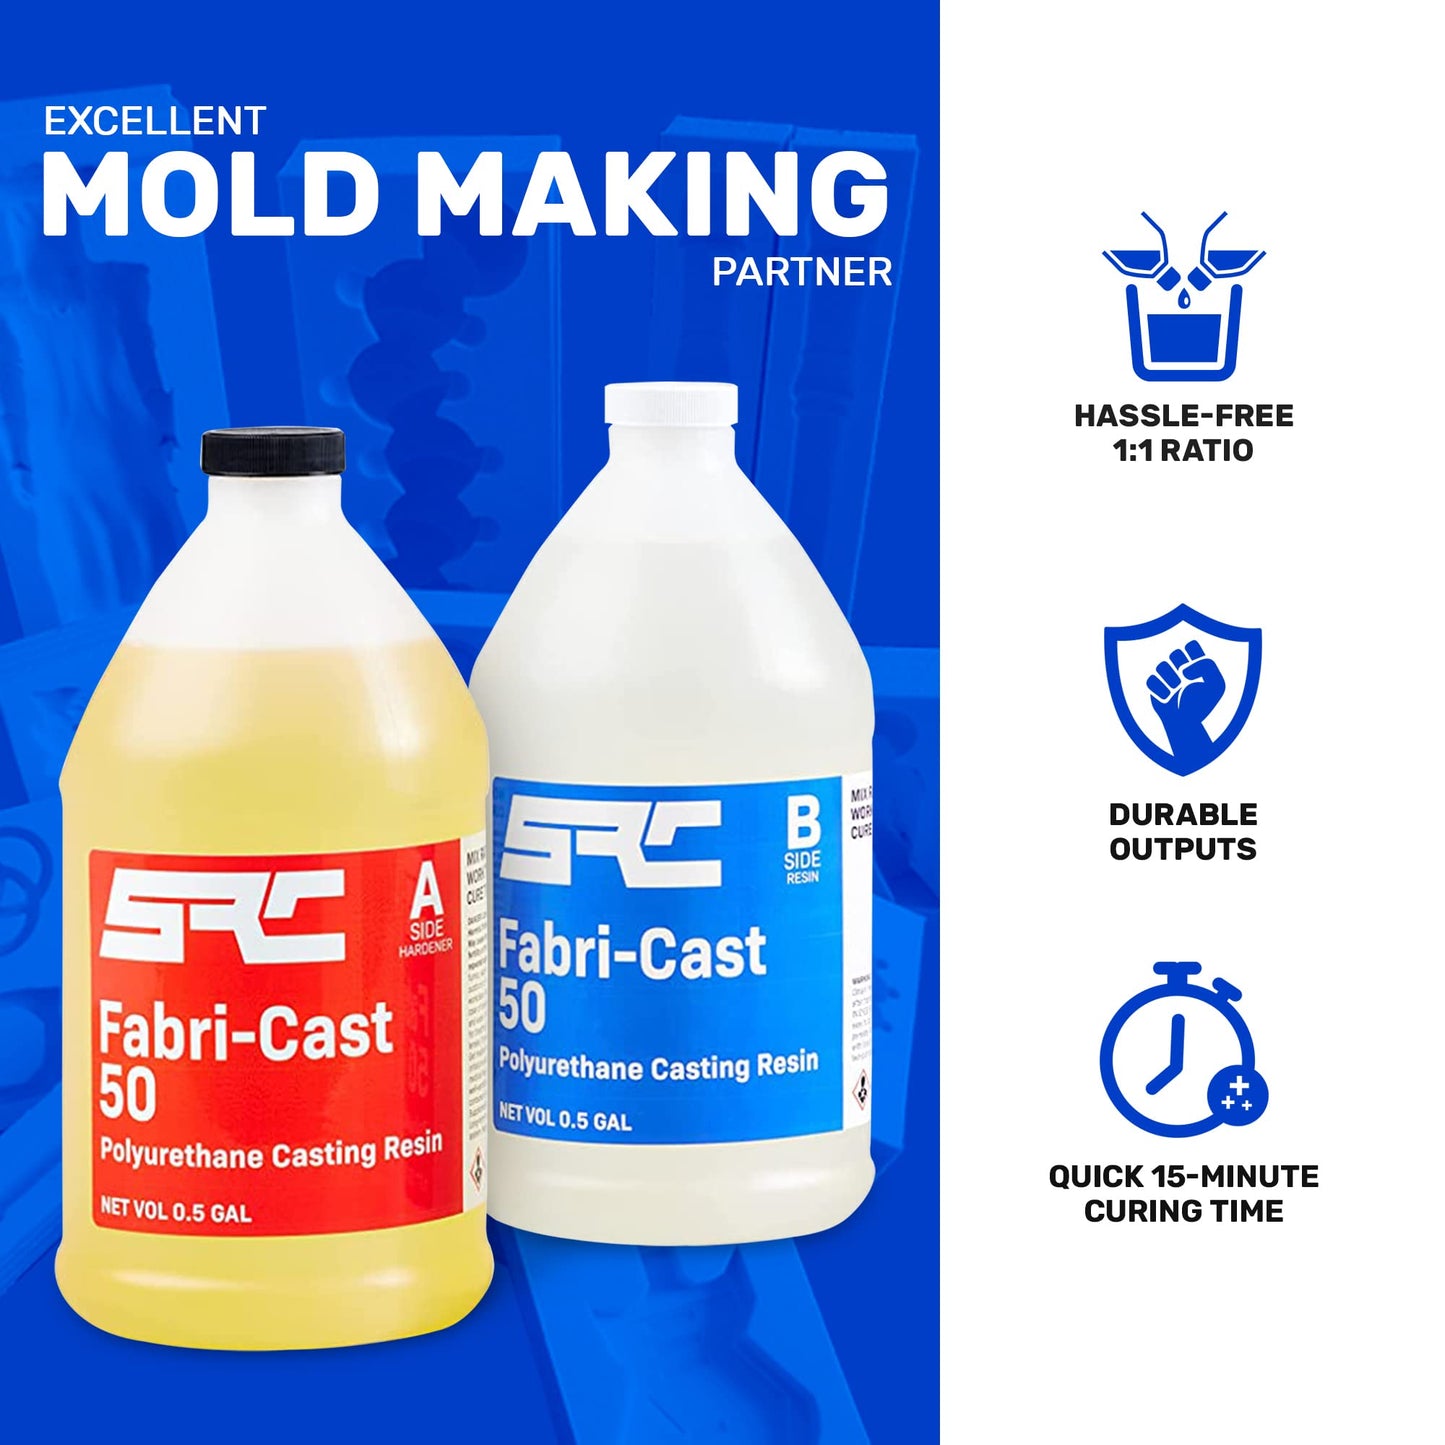 Specialty Resin & Chemical Fabri-Cast 50 [1 Gallon Kit] | 2-Part Polyurethane Casting Resin for Models, Figurines, and Sculptures | Beginner Liquid